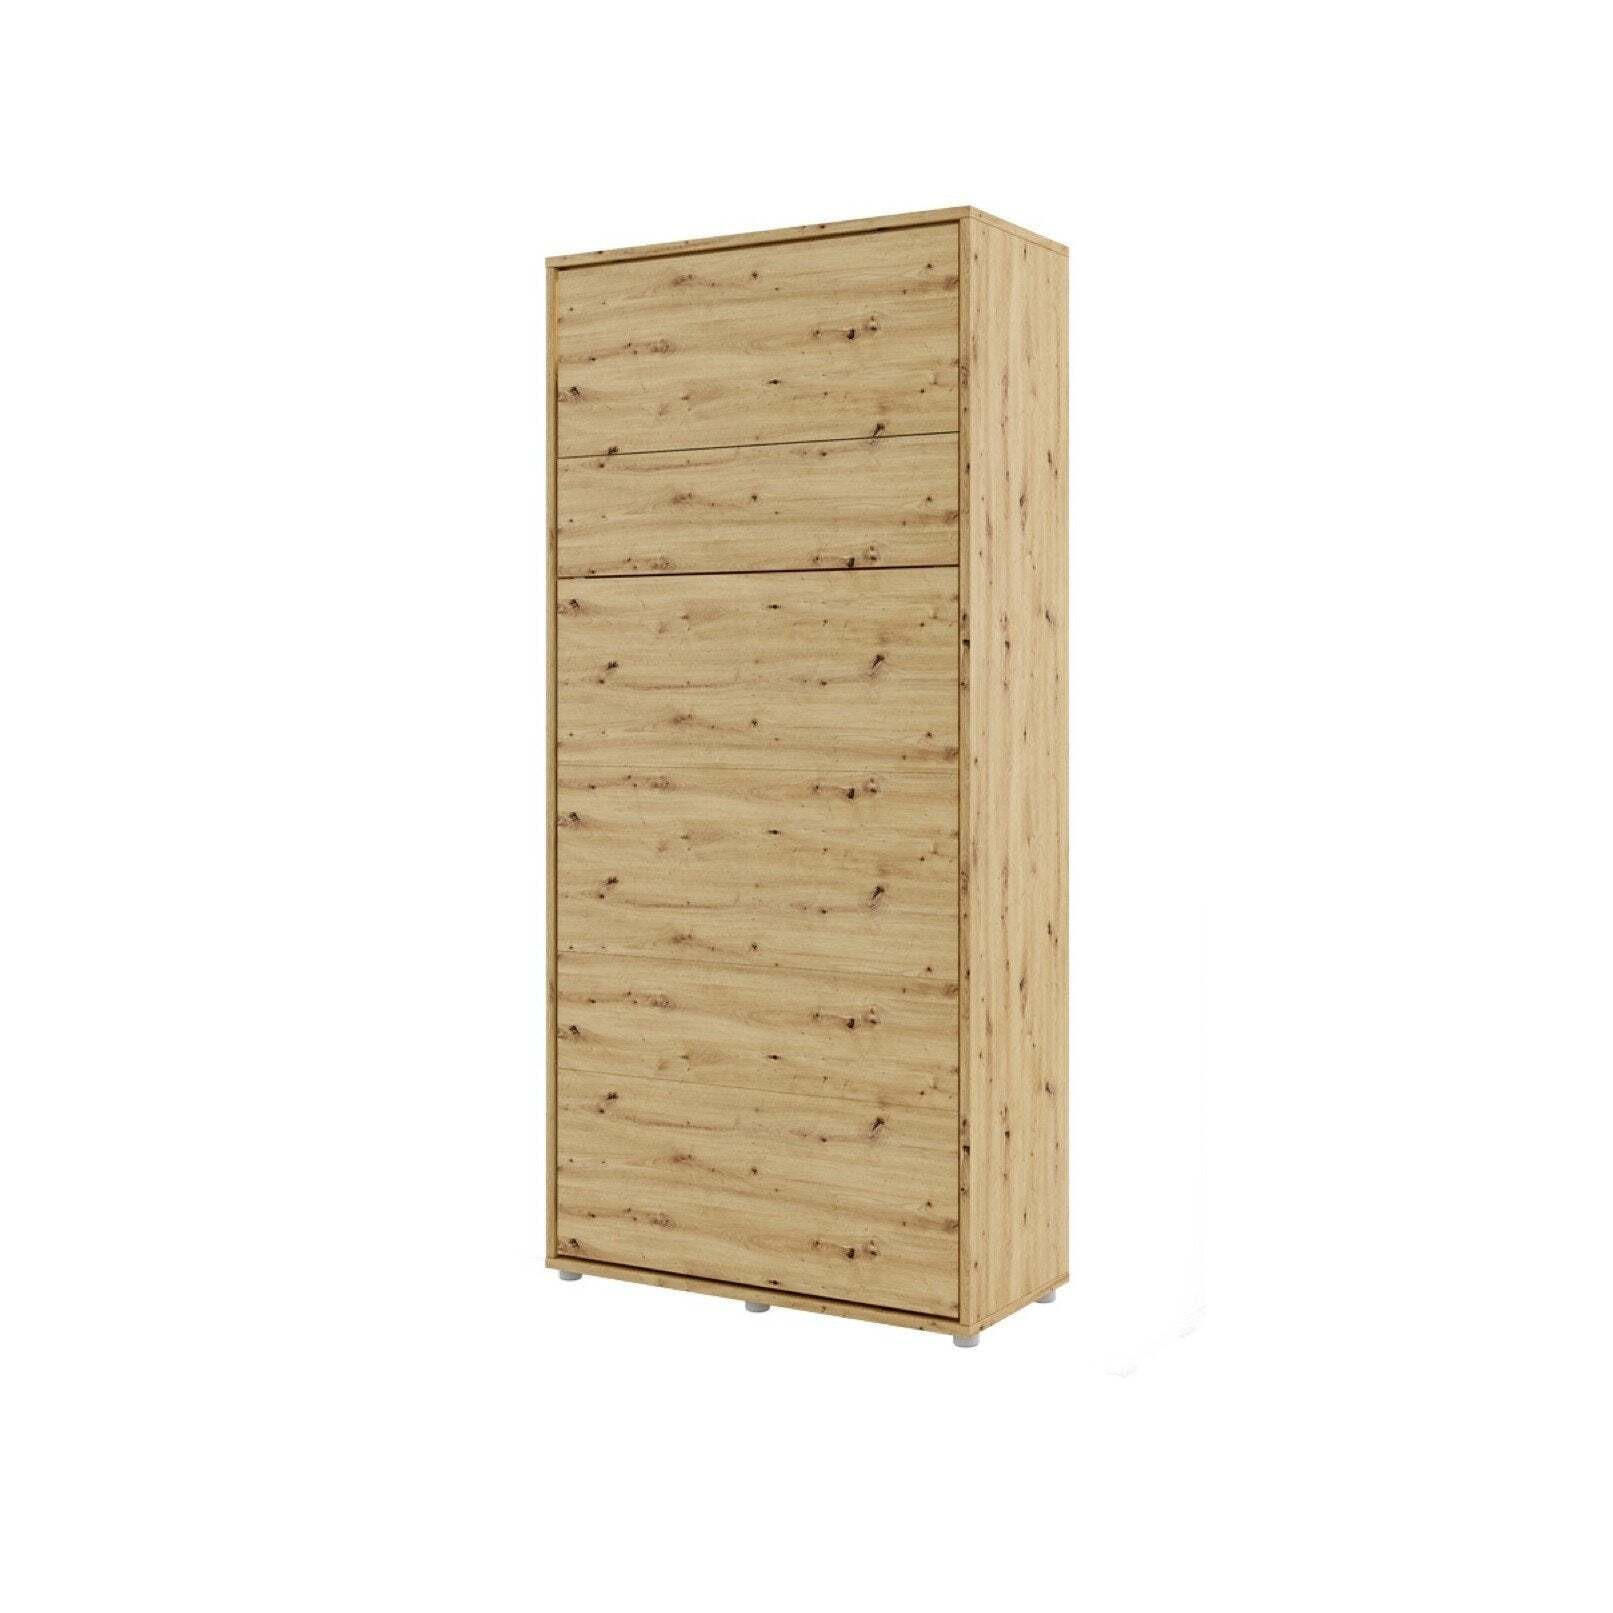 BC-03 Vertical Wall Bed Concept 90cm With Storage Cabinets and LED - Oak Artisan 90 x 200cm - image 1